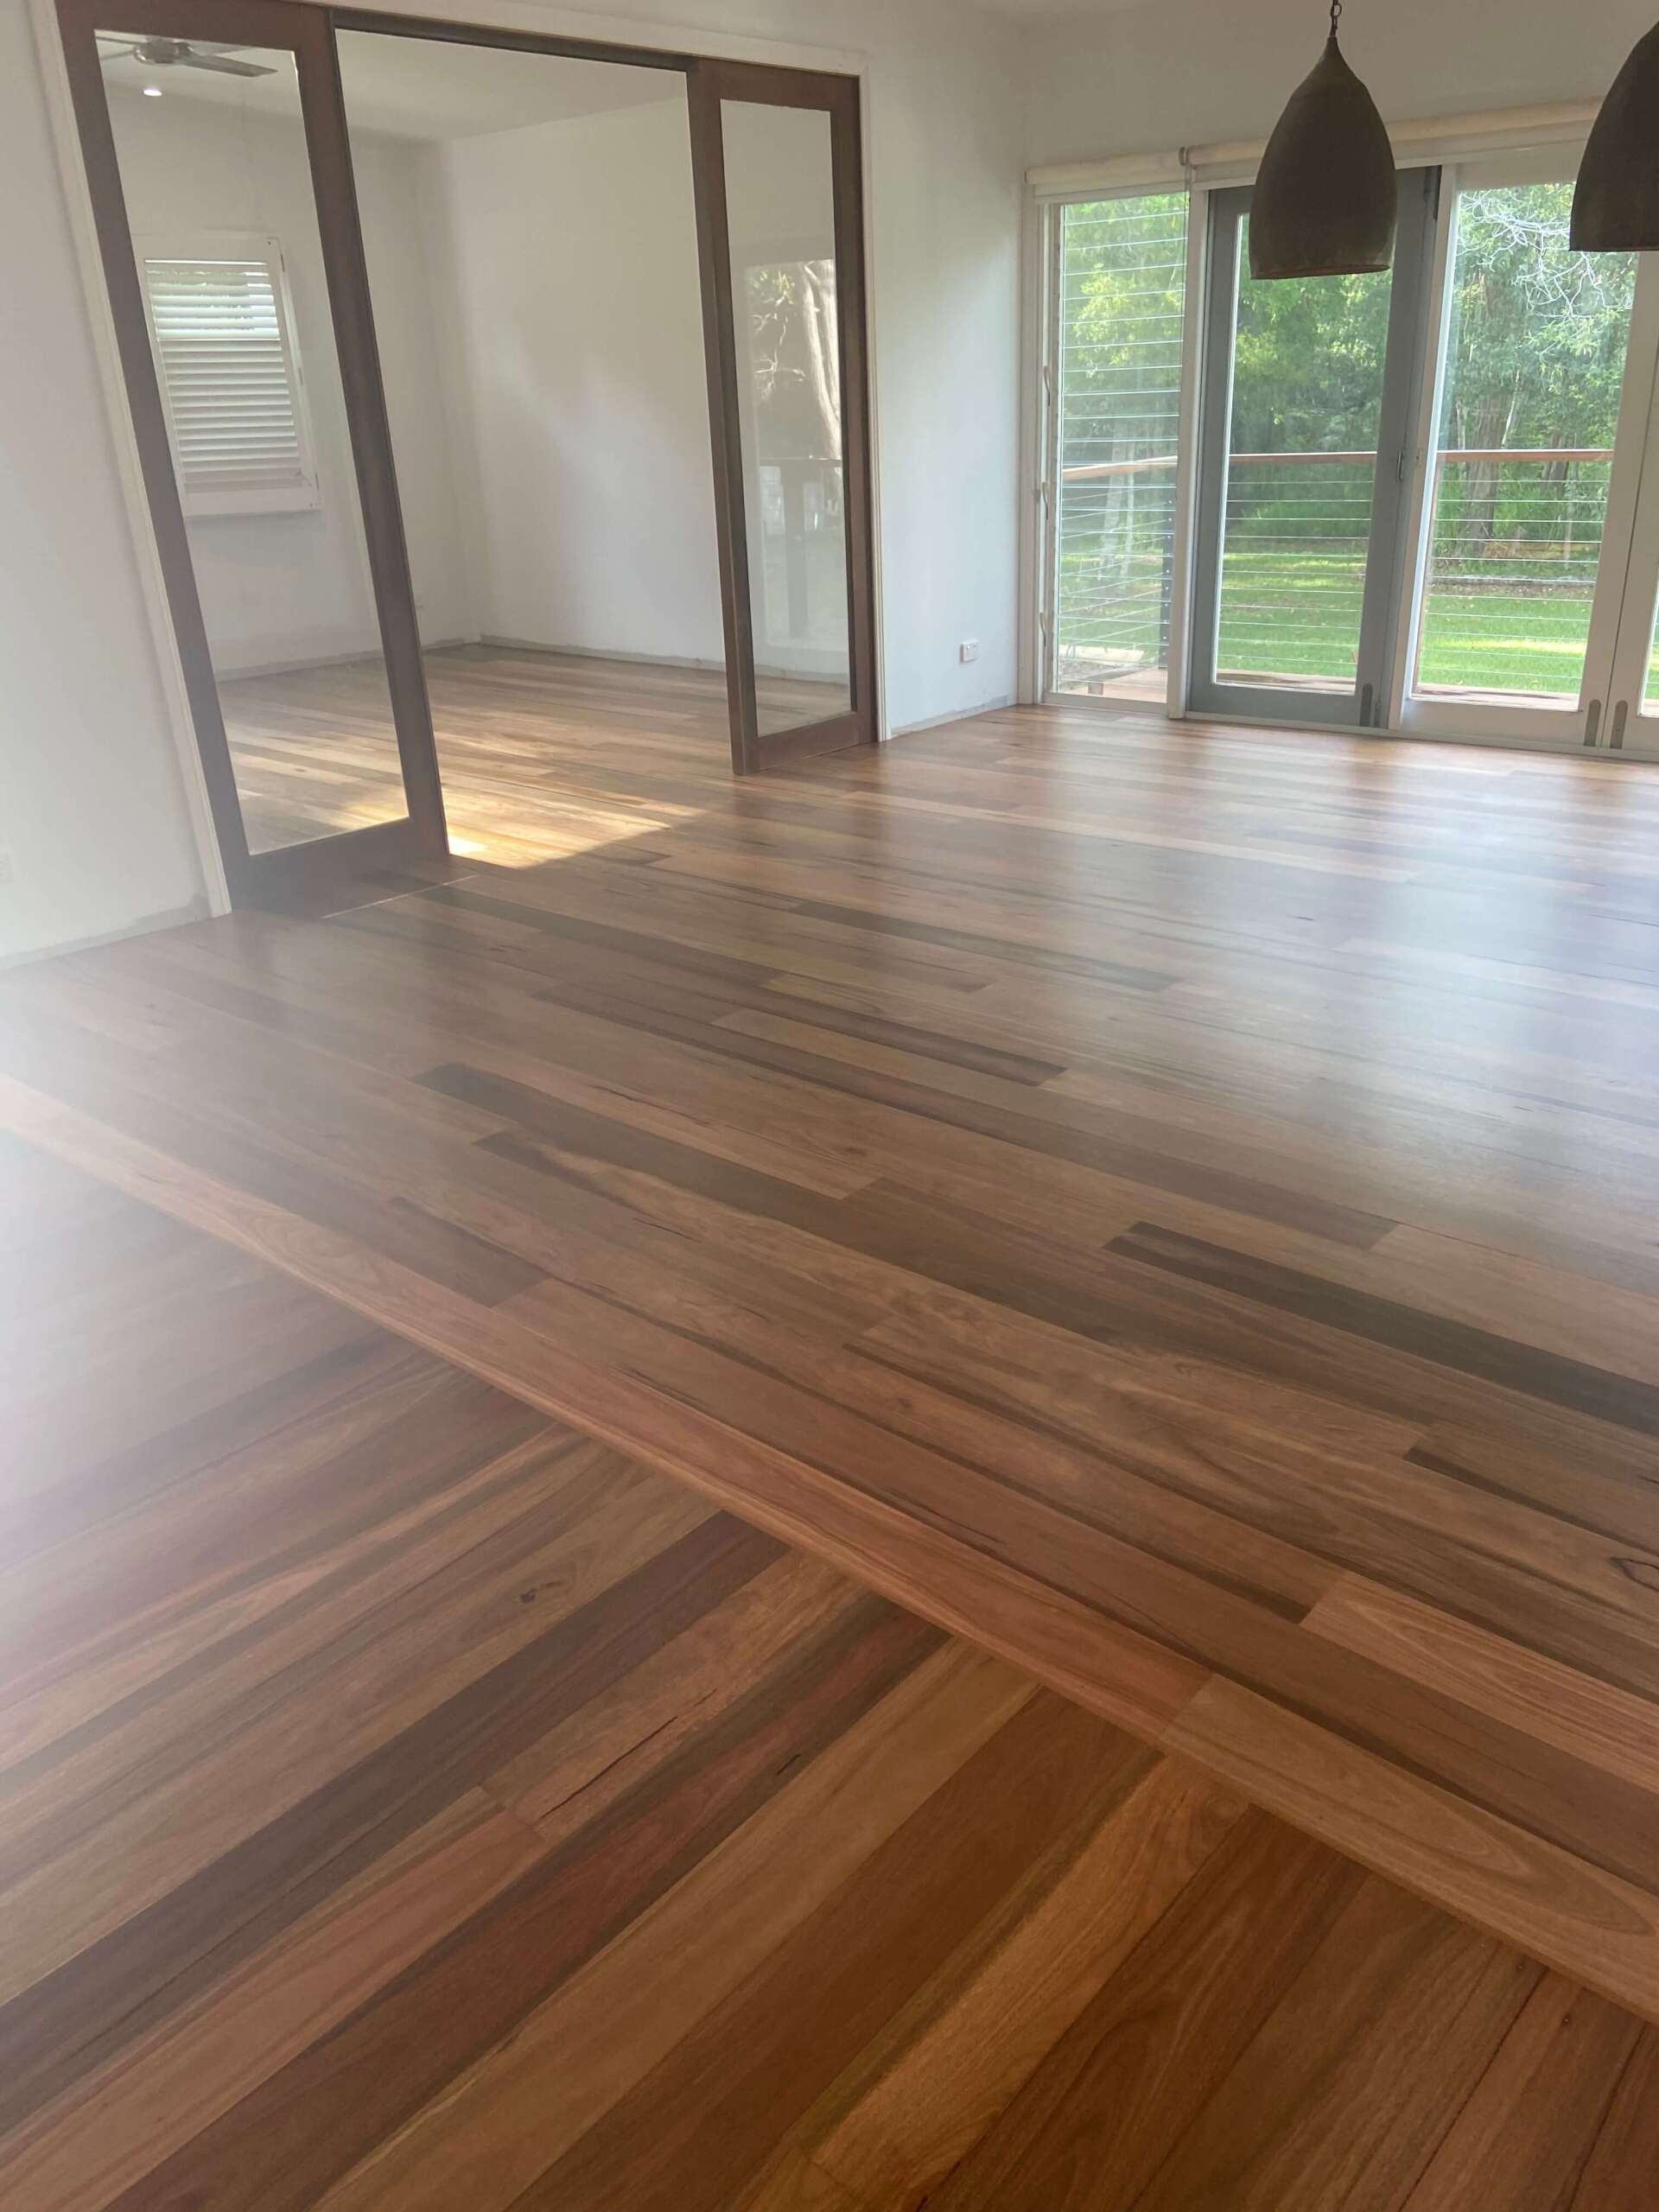 Before Staining — Dull Floors in Chinderah, NSW